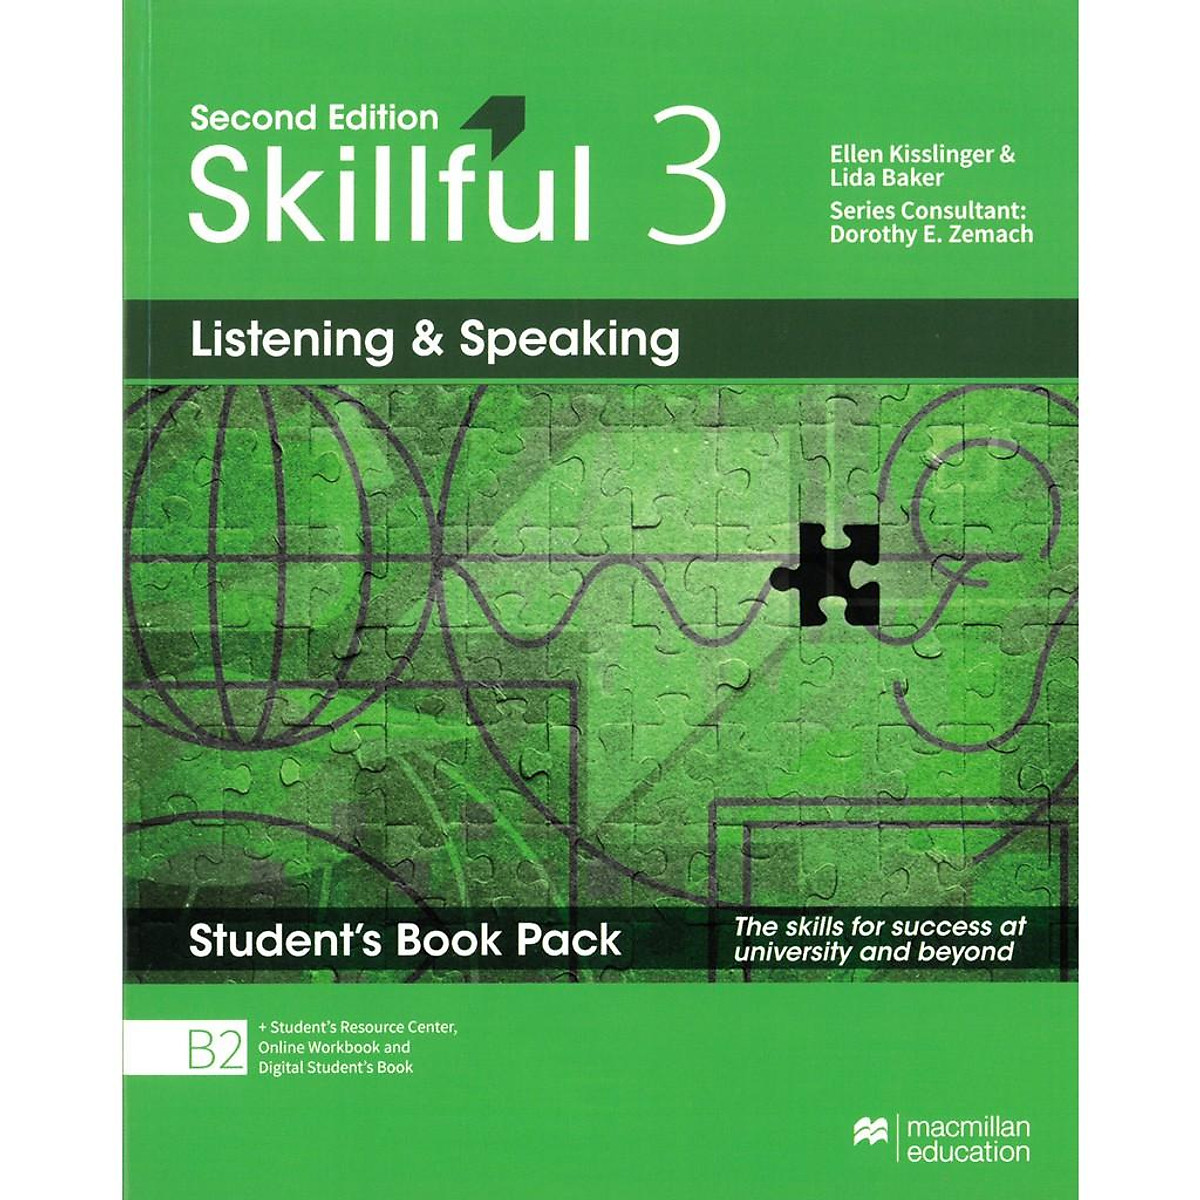 Skillful Second Edition Listening &Speaking 3 Student's Book + Digital Student's Book Pack